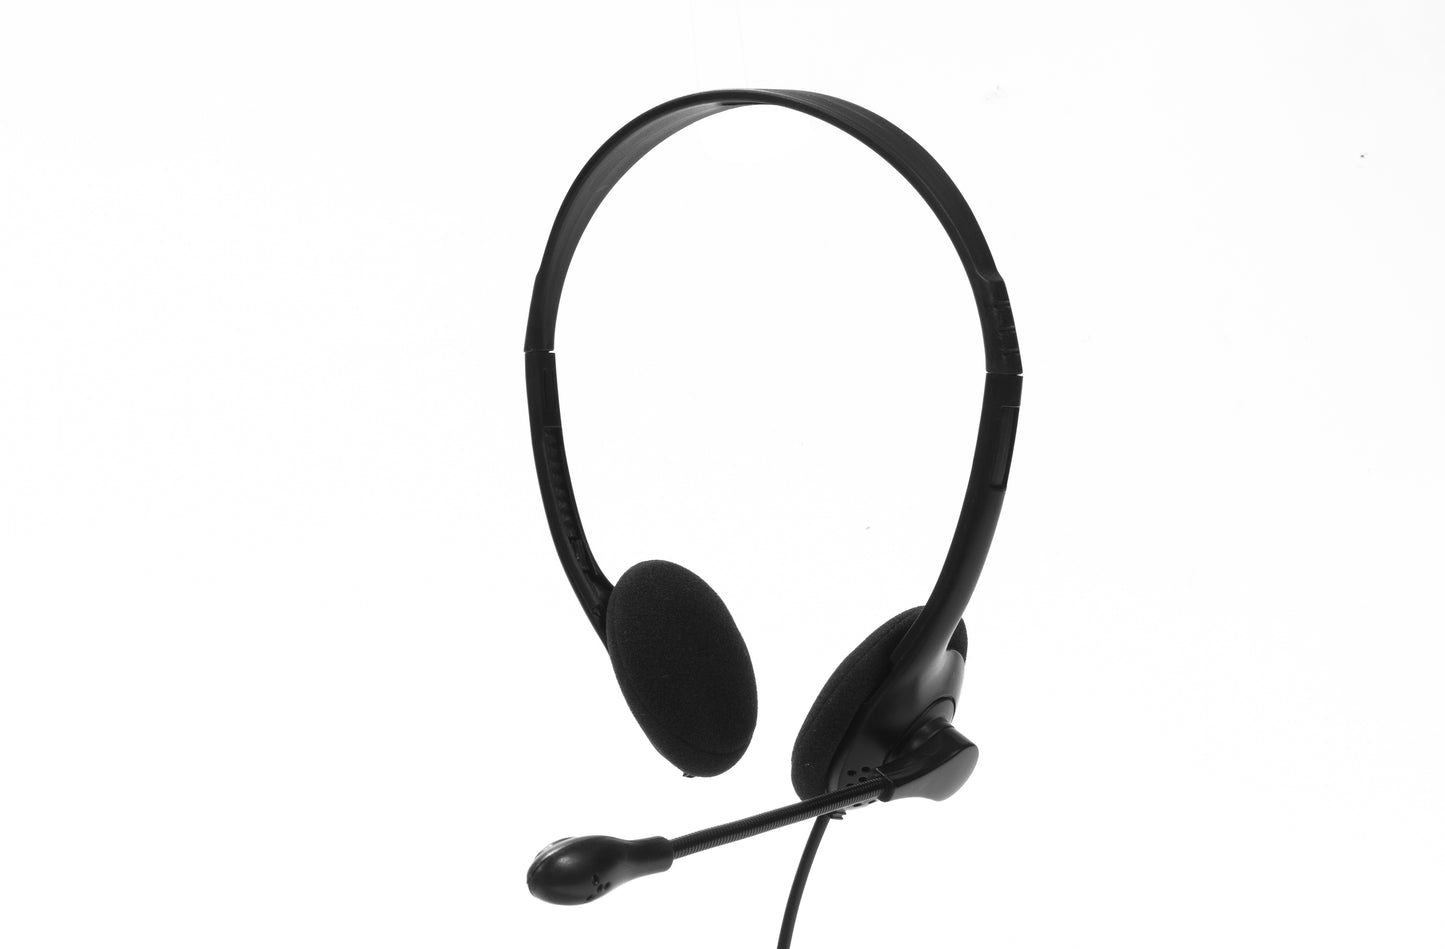 Tellur Basic PCH1 Over-Ear Headphones, Black - High Quality and Comfortable Design